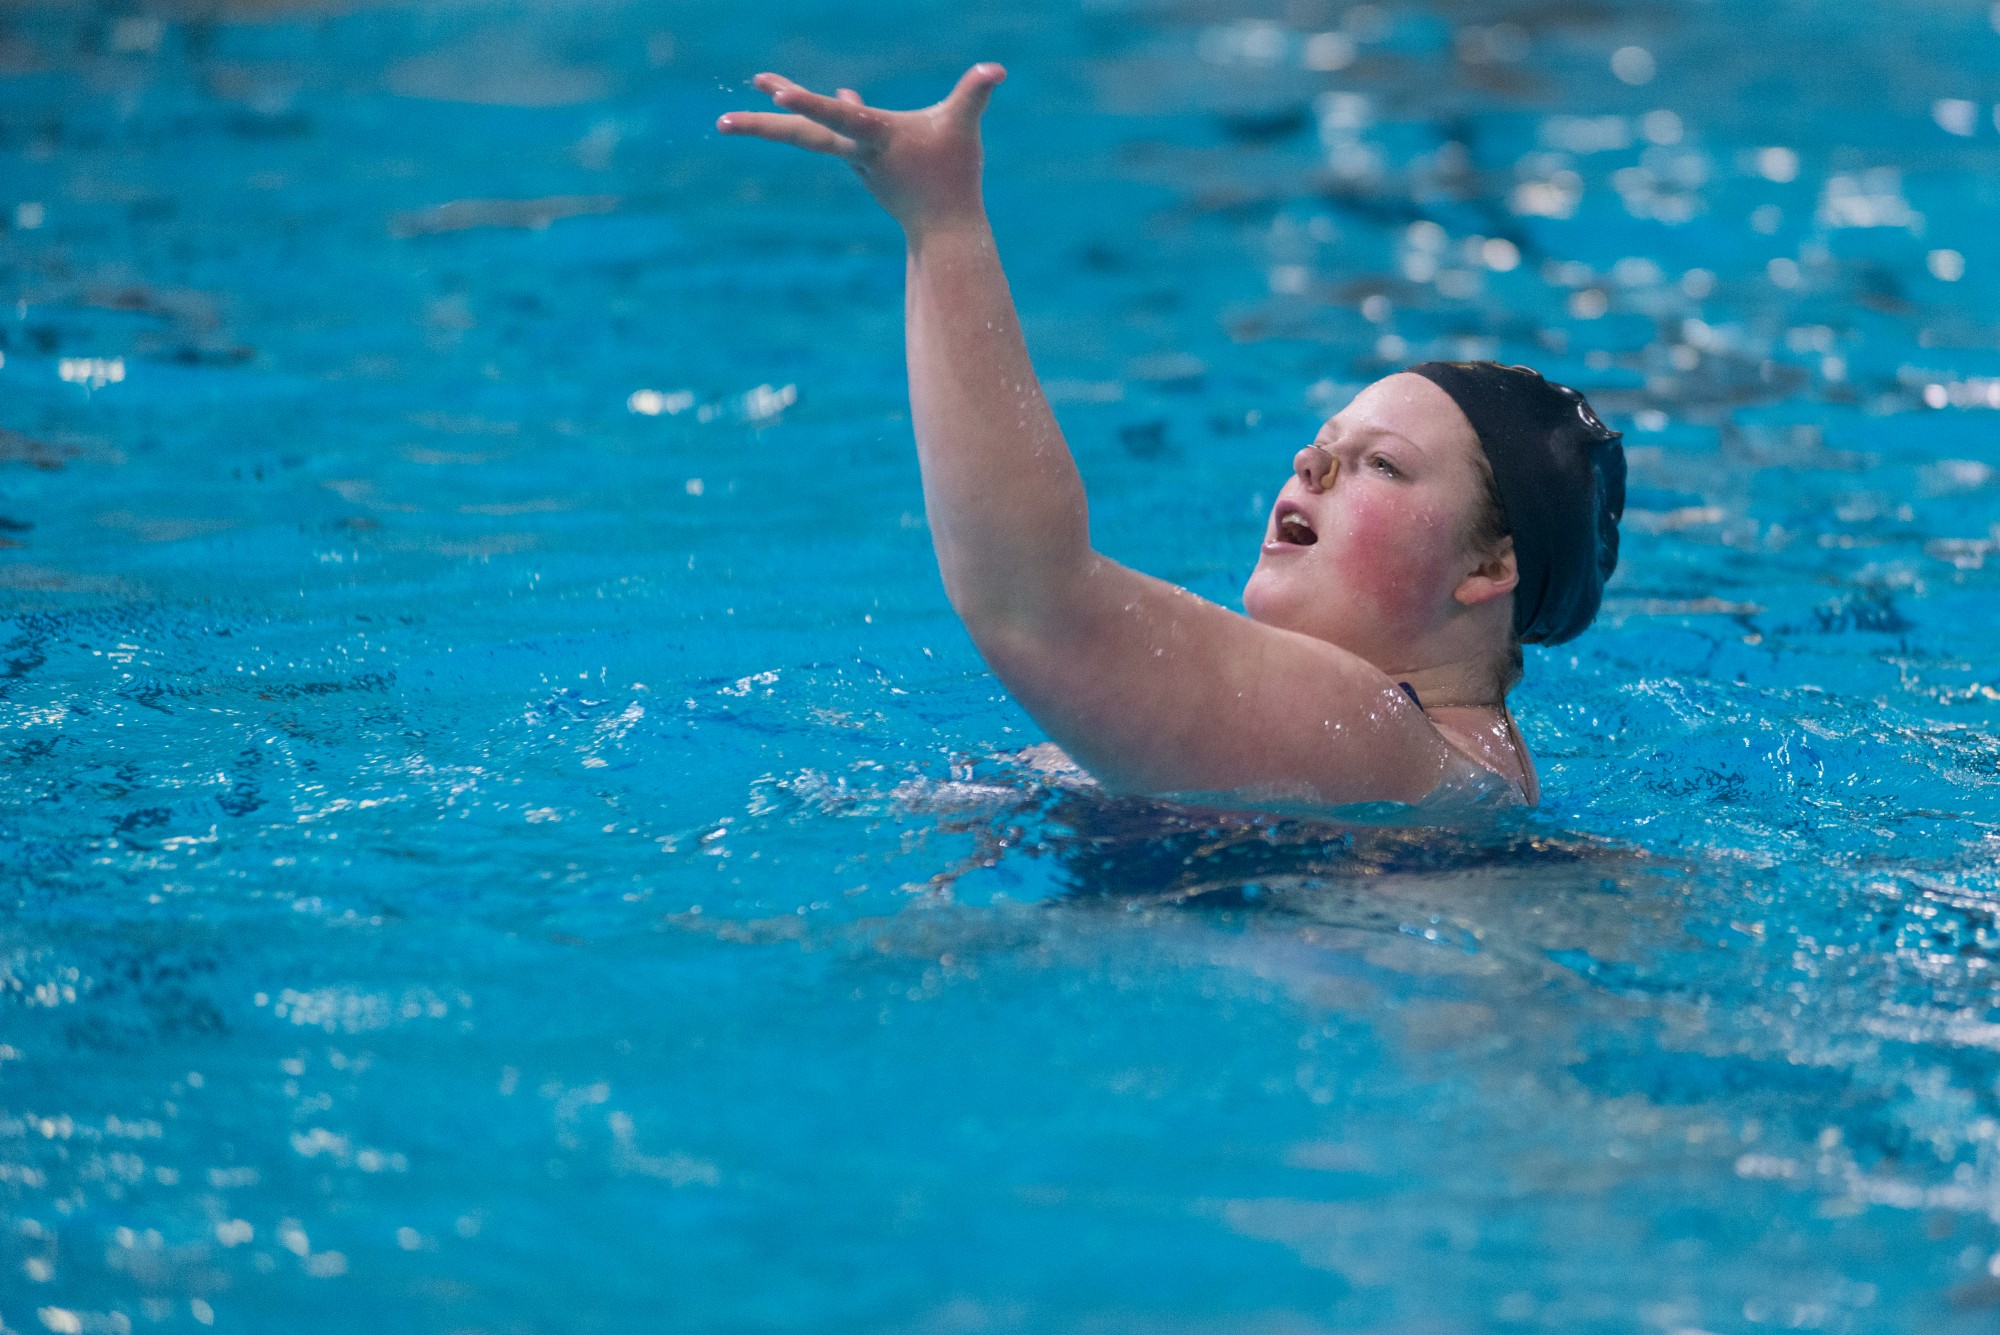 Senior Sarah Thorstenson participates in a University of Minnesota Synchronized Swimming Club practice session in Cooke Hall on Wednesday, March 4.